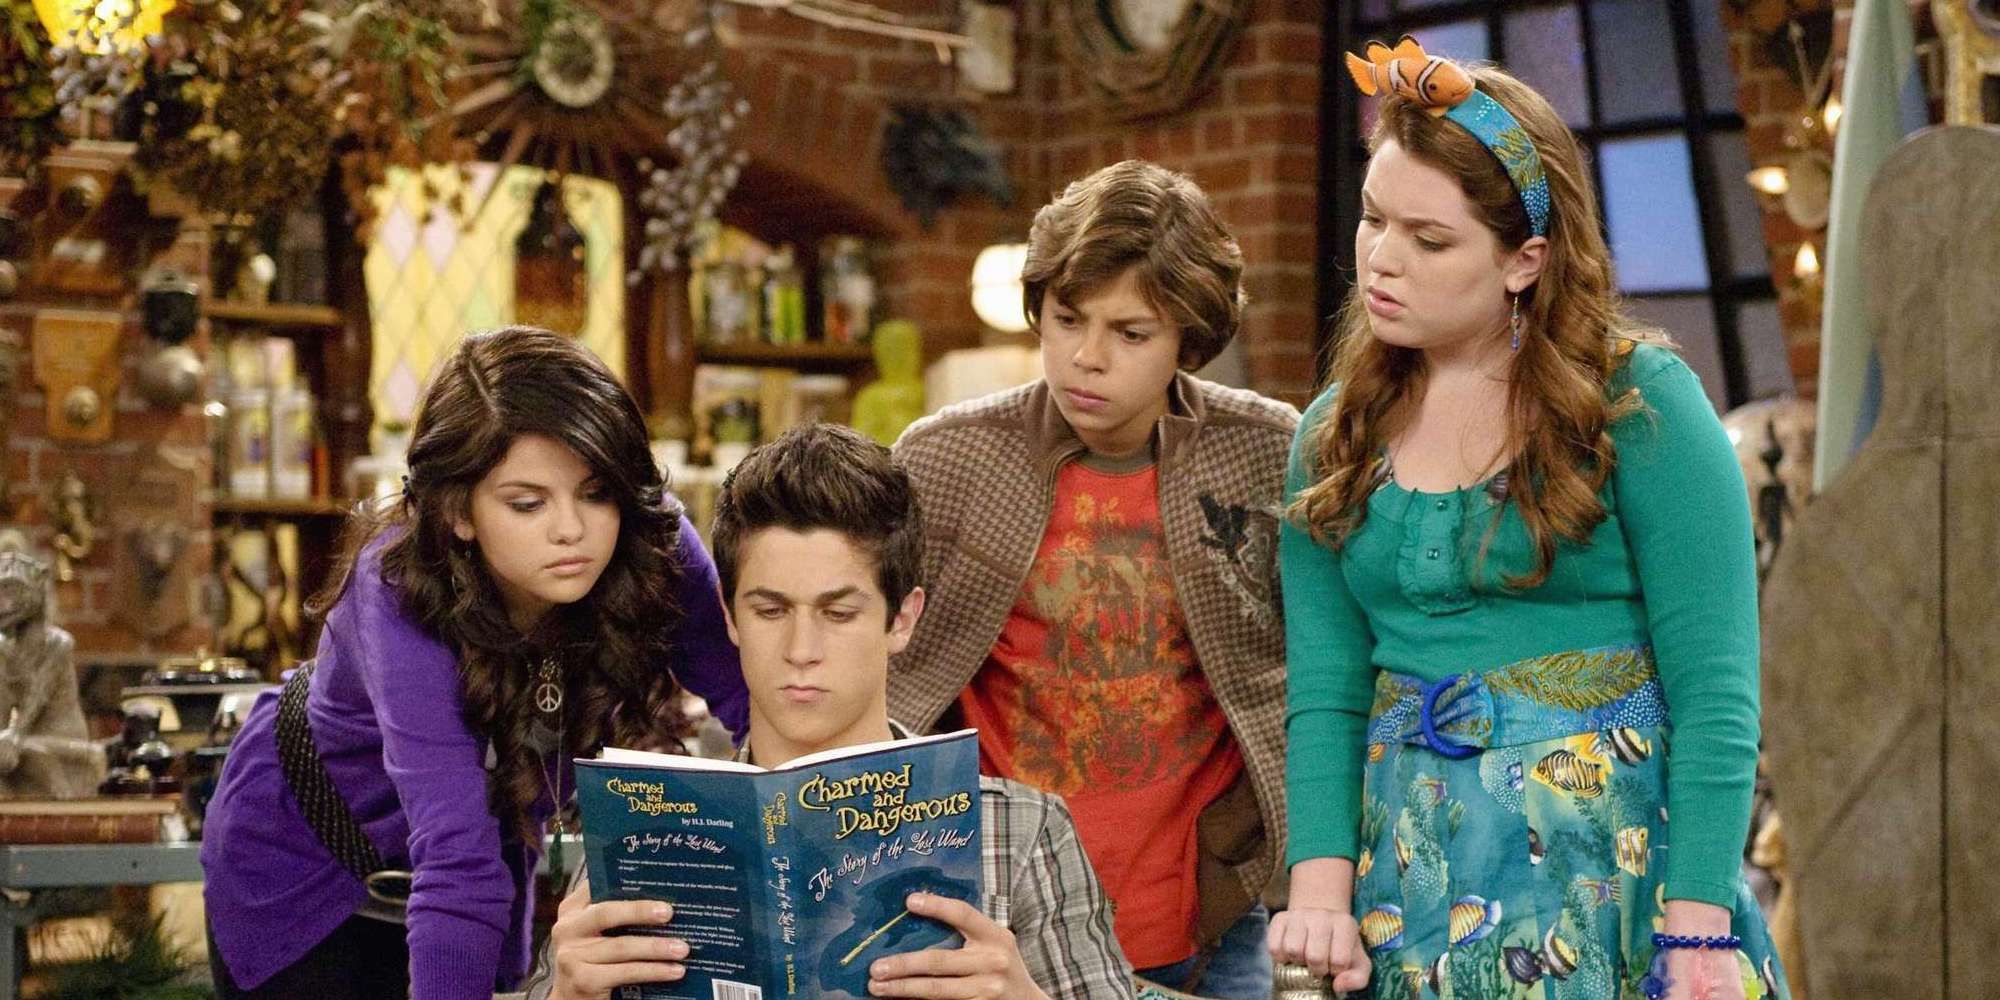 Wizards Of Waverly Place: 5 Things That Changed After The Pilot (& 5 That Stayed The Same)